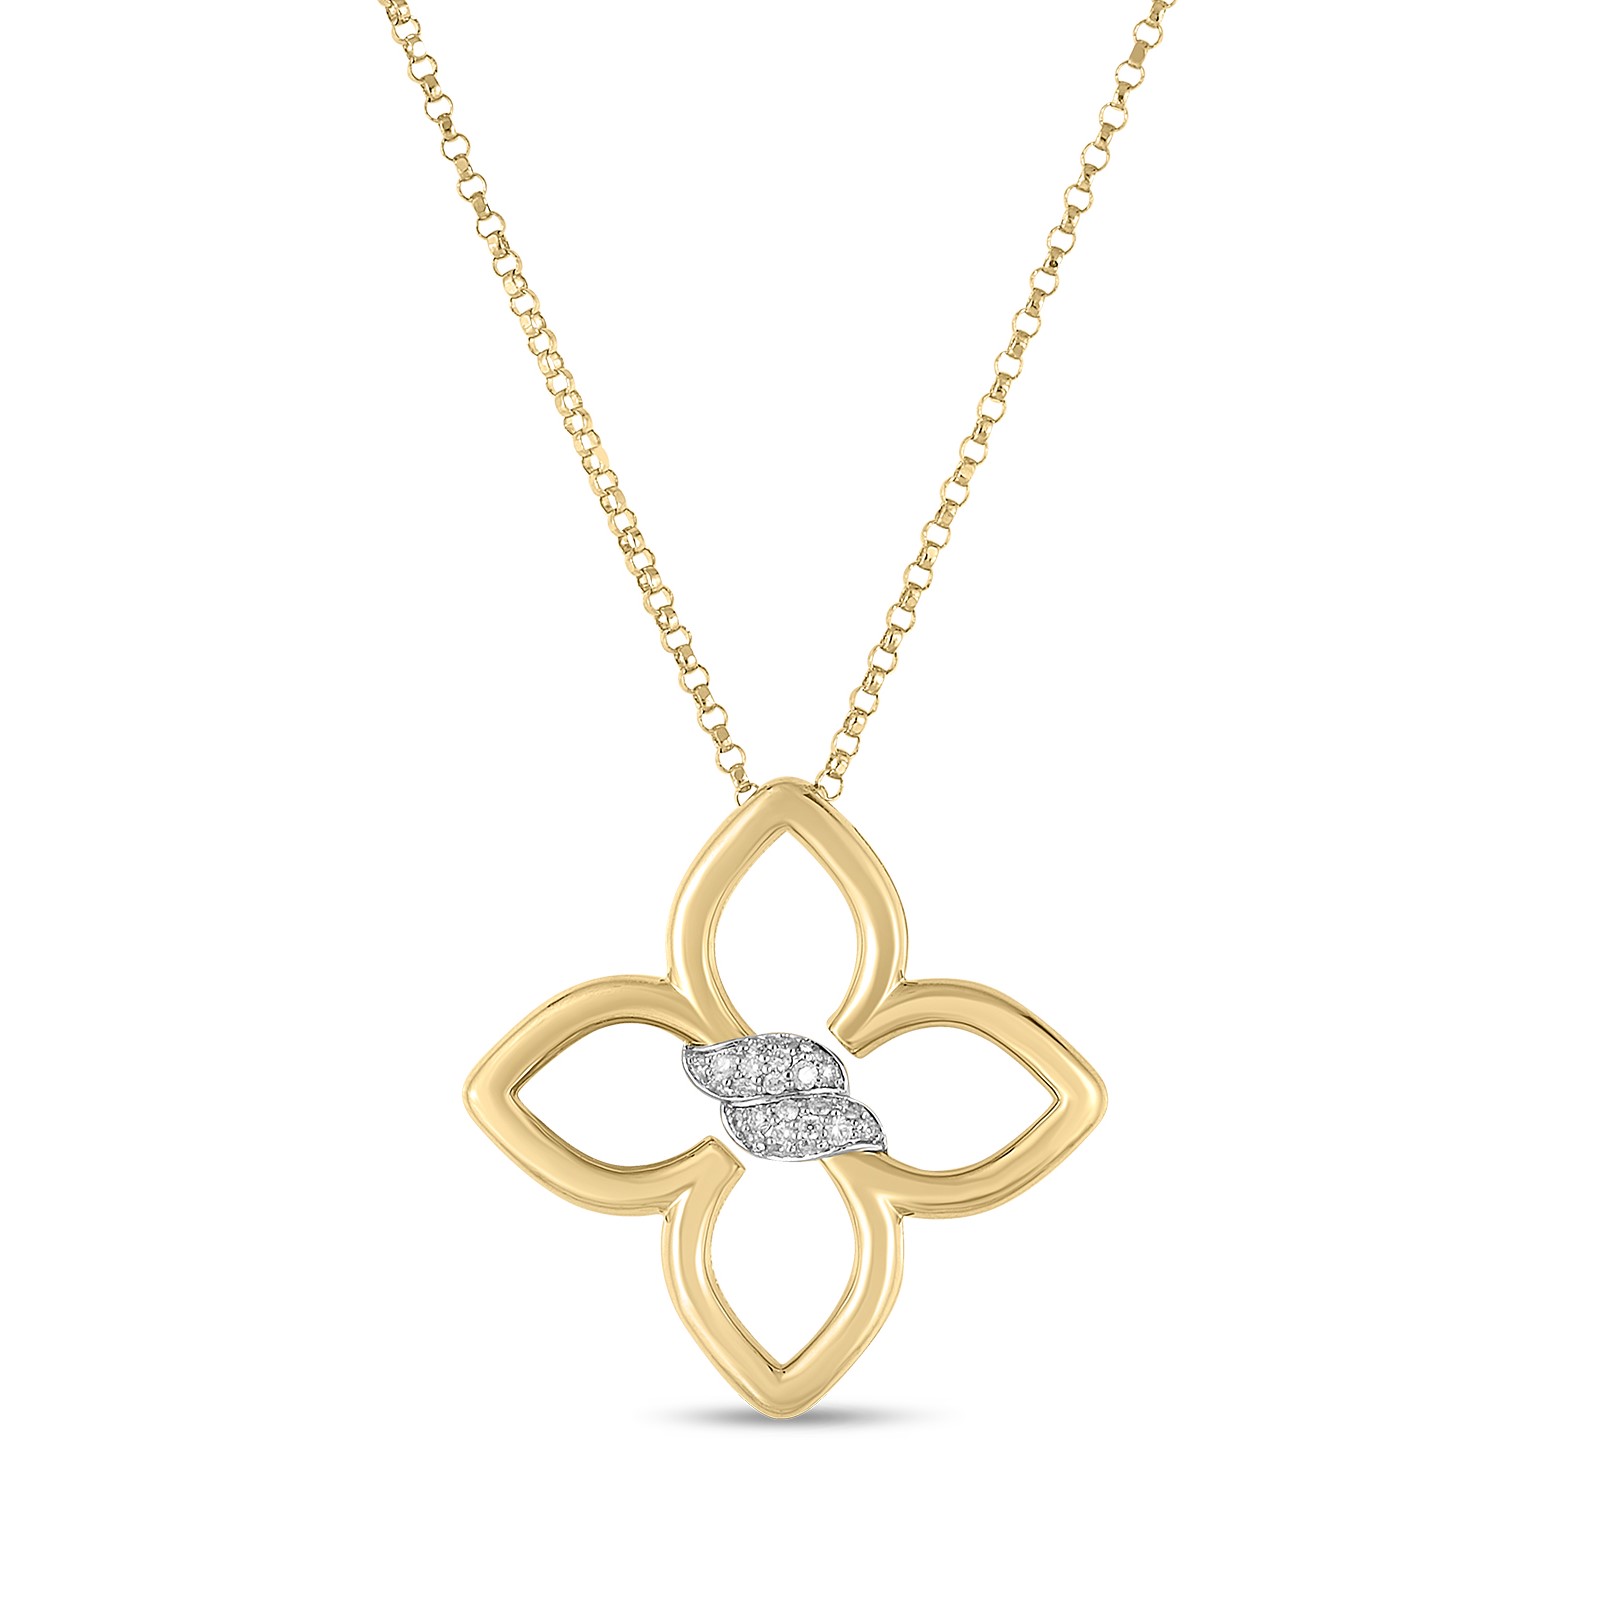 Roberto Coin 18K Yellow and White Gold Cialoma Small Diamond Flower Necklace